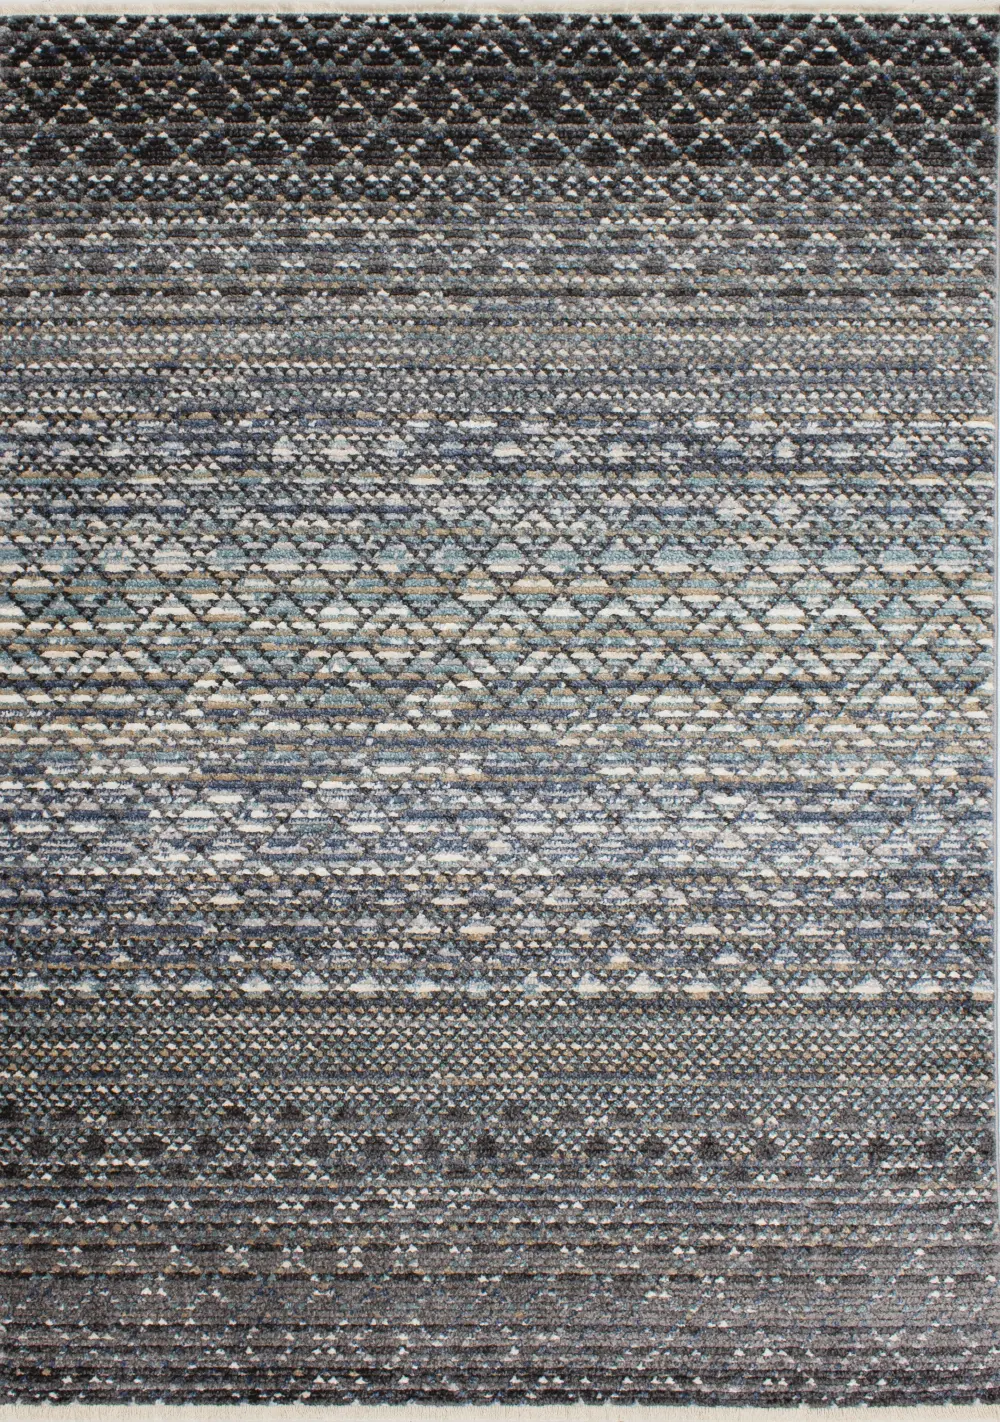 Calabar 8 x 10 Blue, Gray, and White Area Rug-1